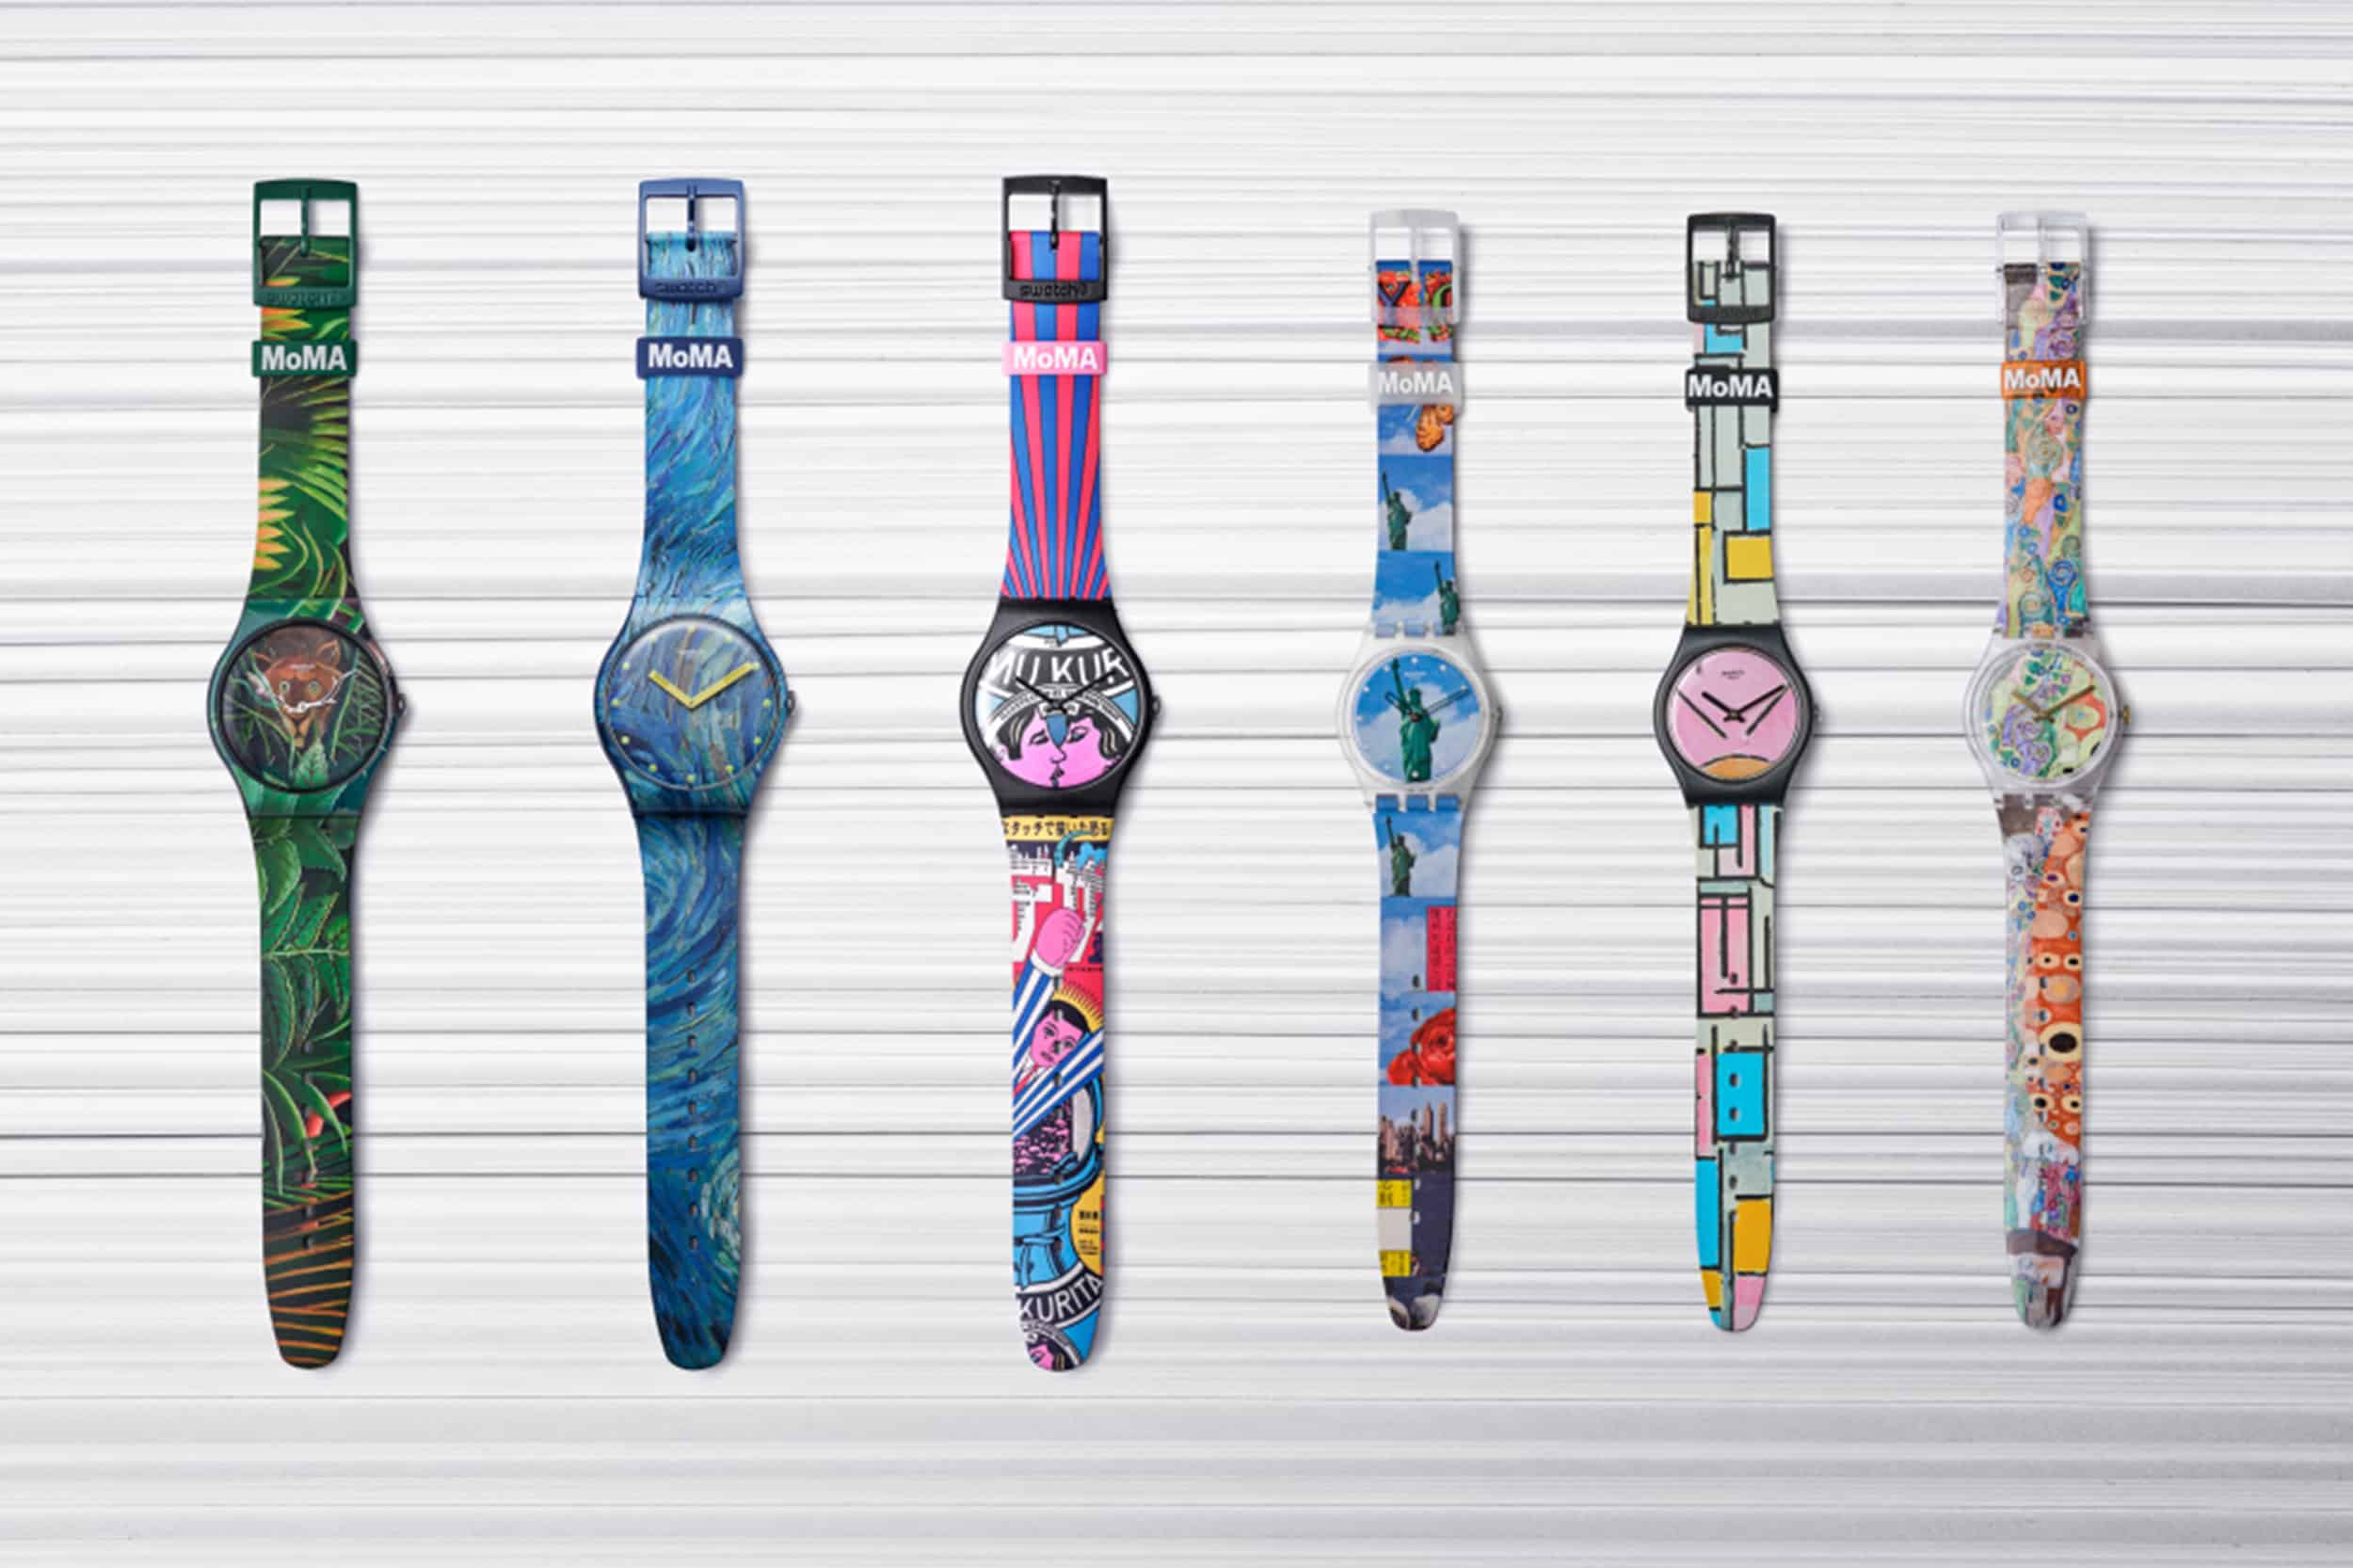 Swatch Partners with MoMA on a New Collection Inspired by Great Modern Art Worn